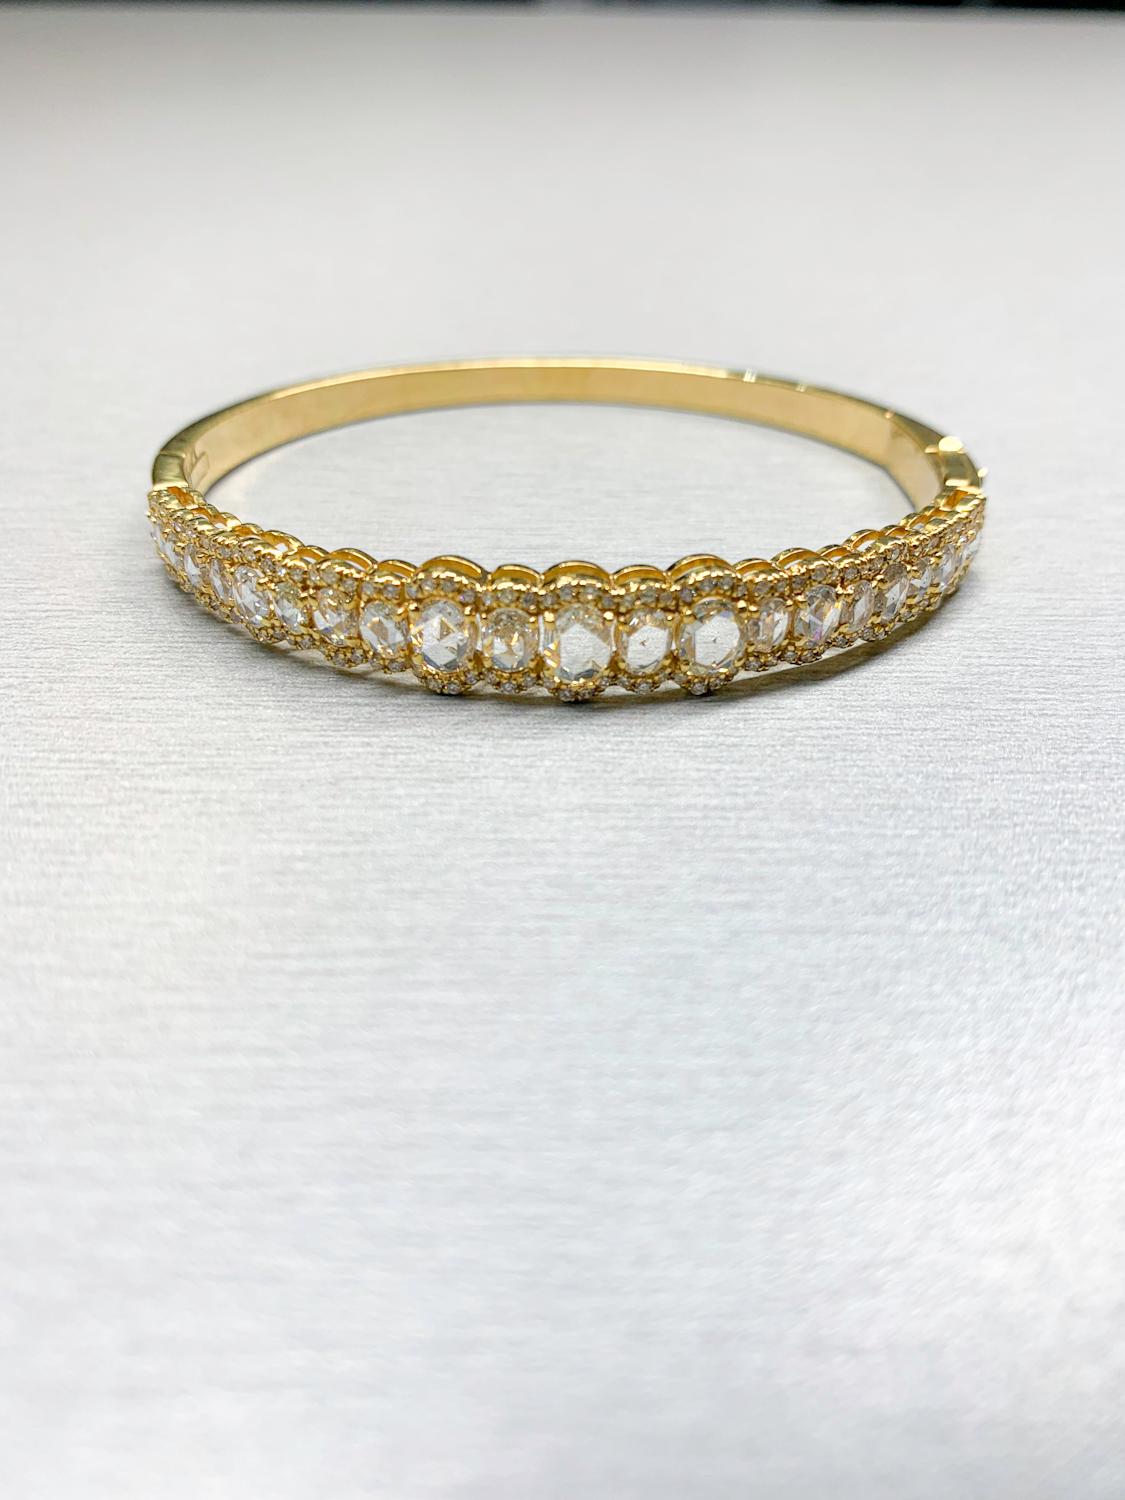 18K Gold Tennis Bracelet with Rose Cut White Diamonds (2.65 Carats) In Excellent Condition For Sale In New York, NY